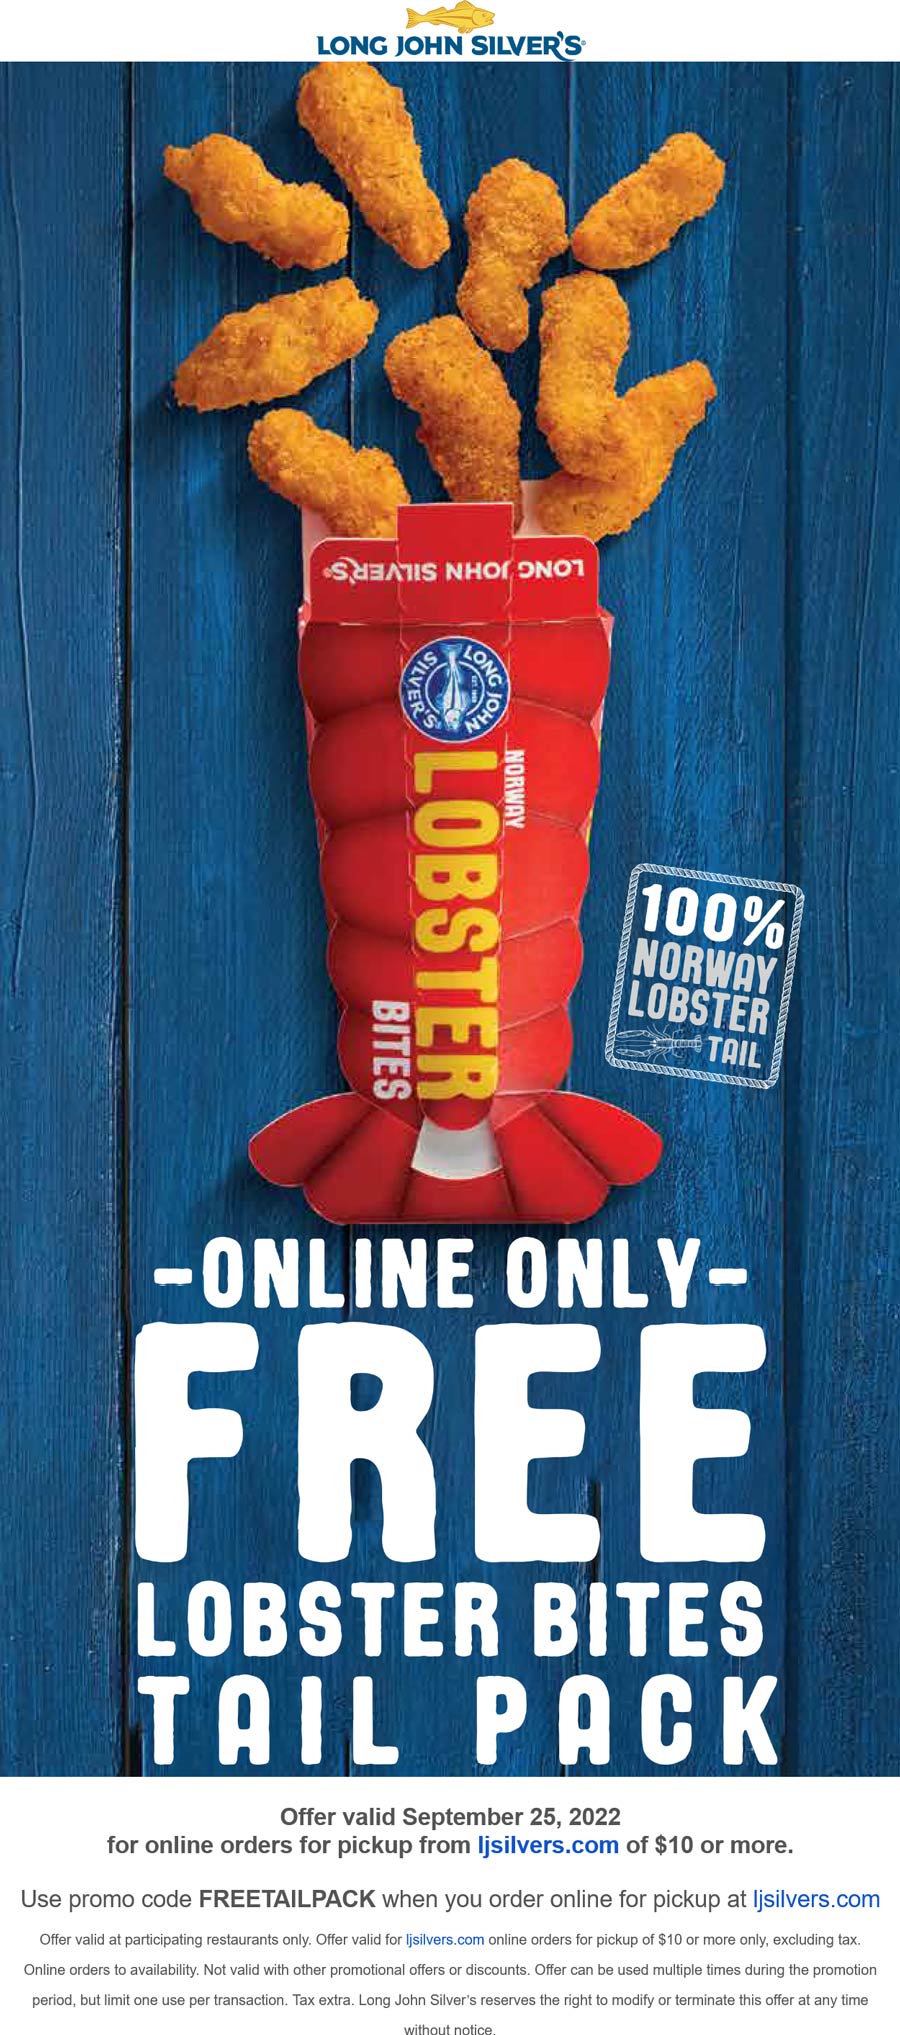 Long John Silvers restaurants Coupon  Free lobster bites today with $10 online at Long John Silvers restaurants via promo code FREETAILPACK #longjohnsilvers 